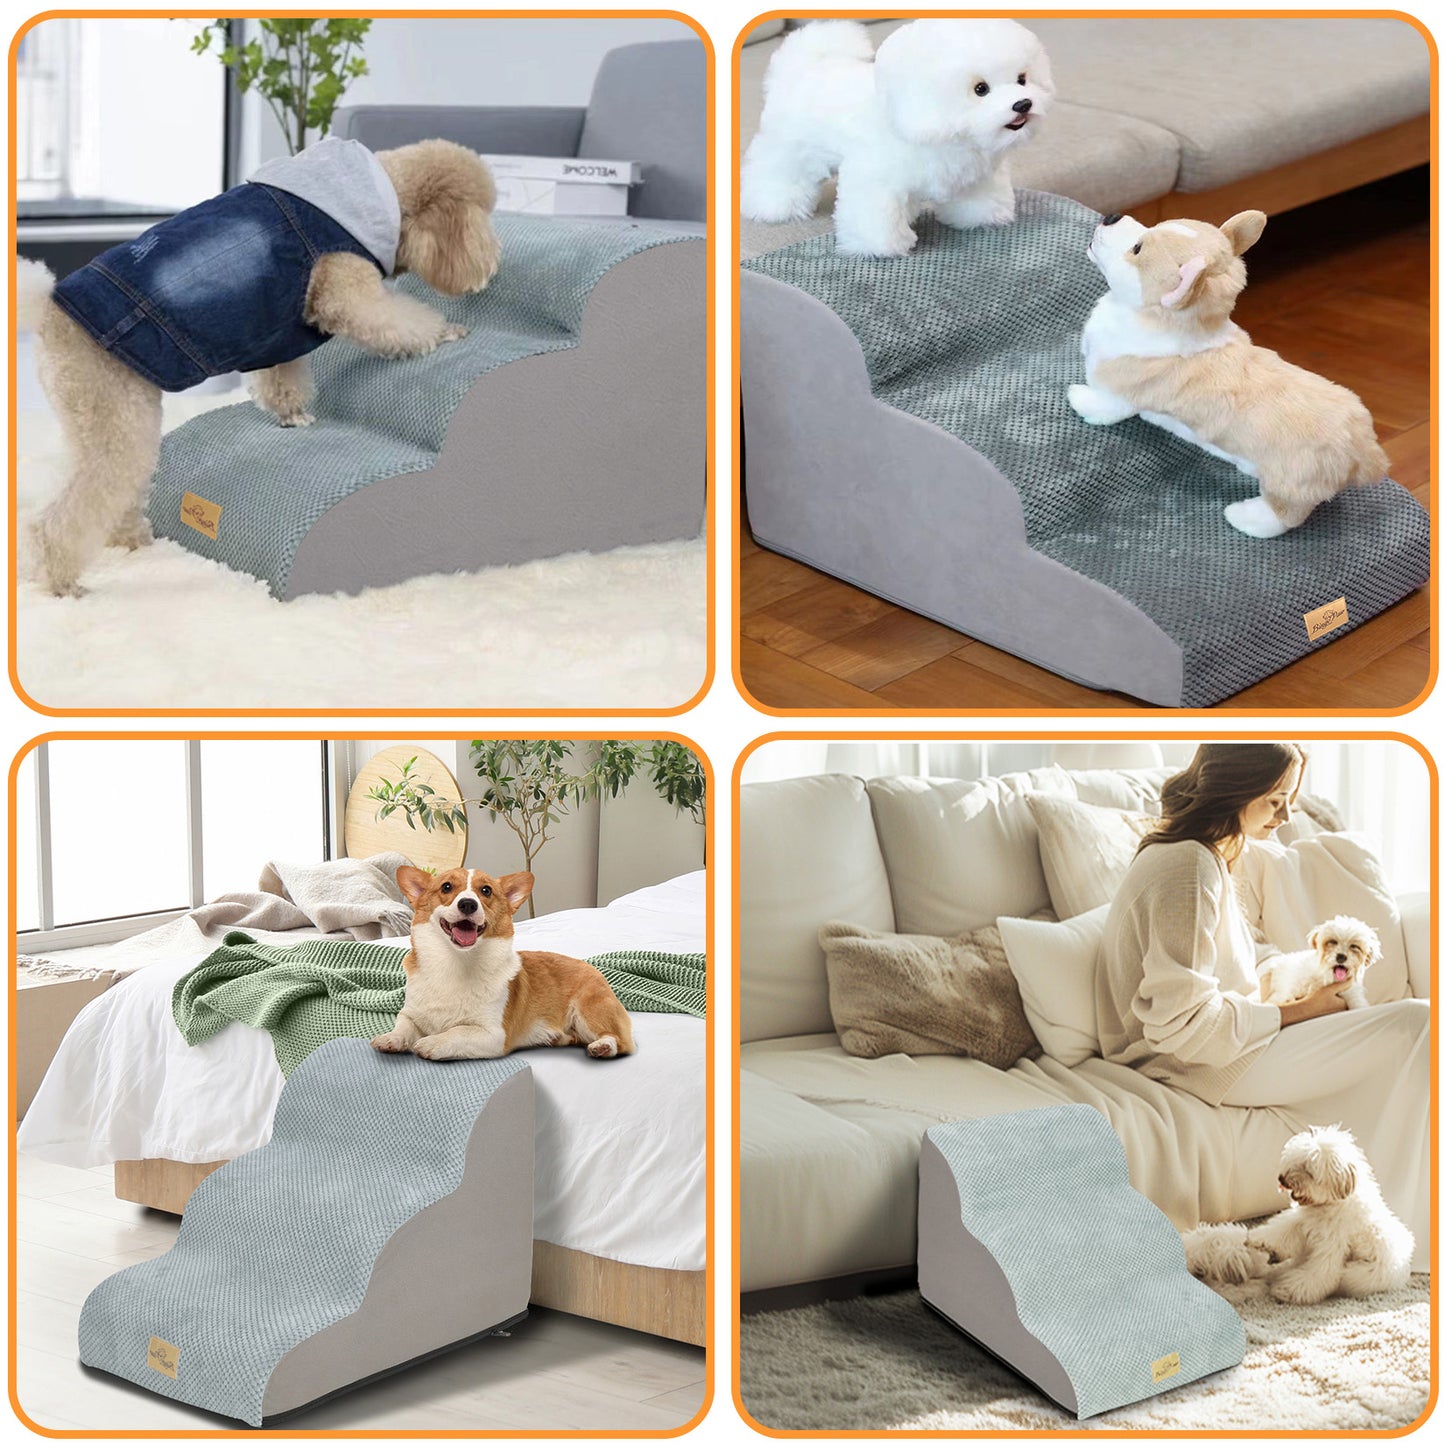 High Density Foam Dog Stairs For High Bed Sofa, 3/4/5 Steps Stairs Washable Cover